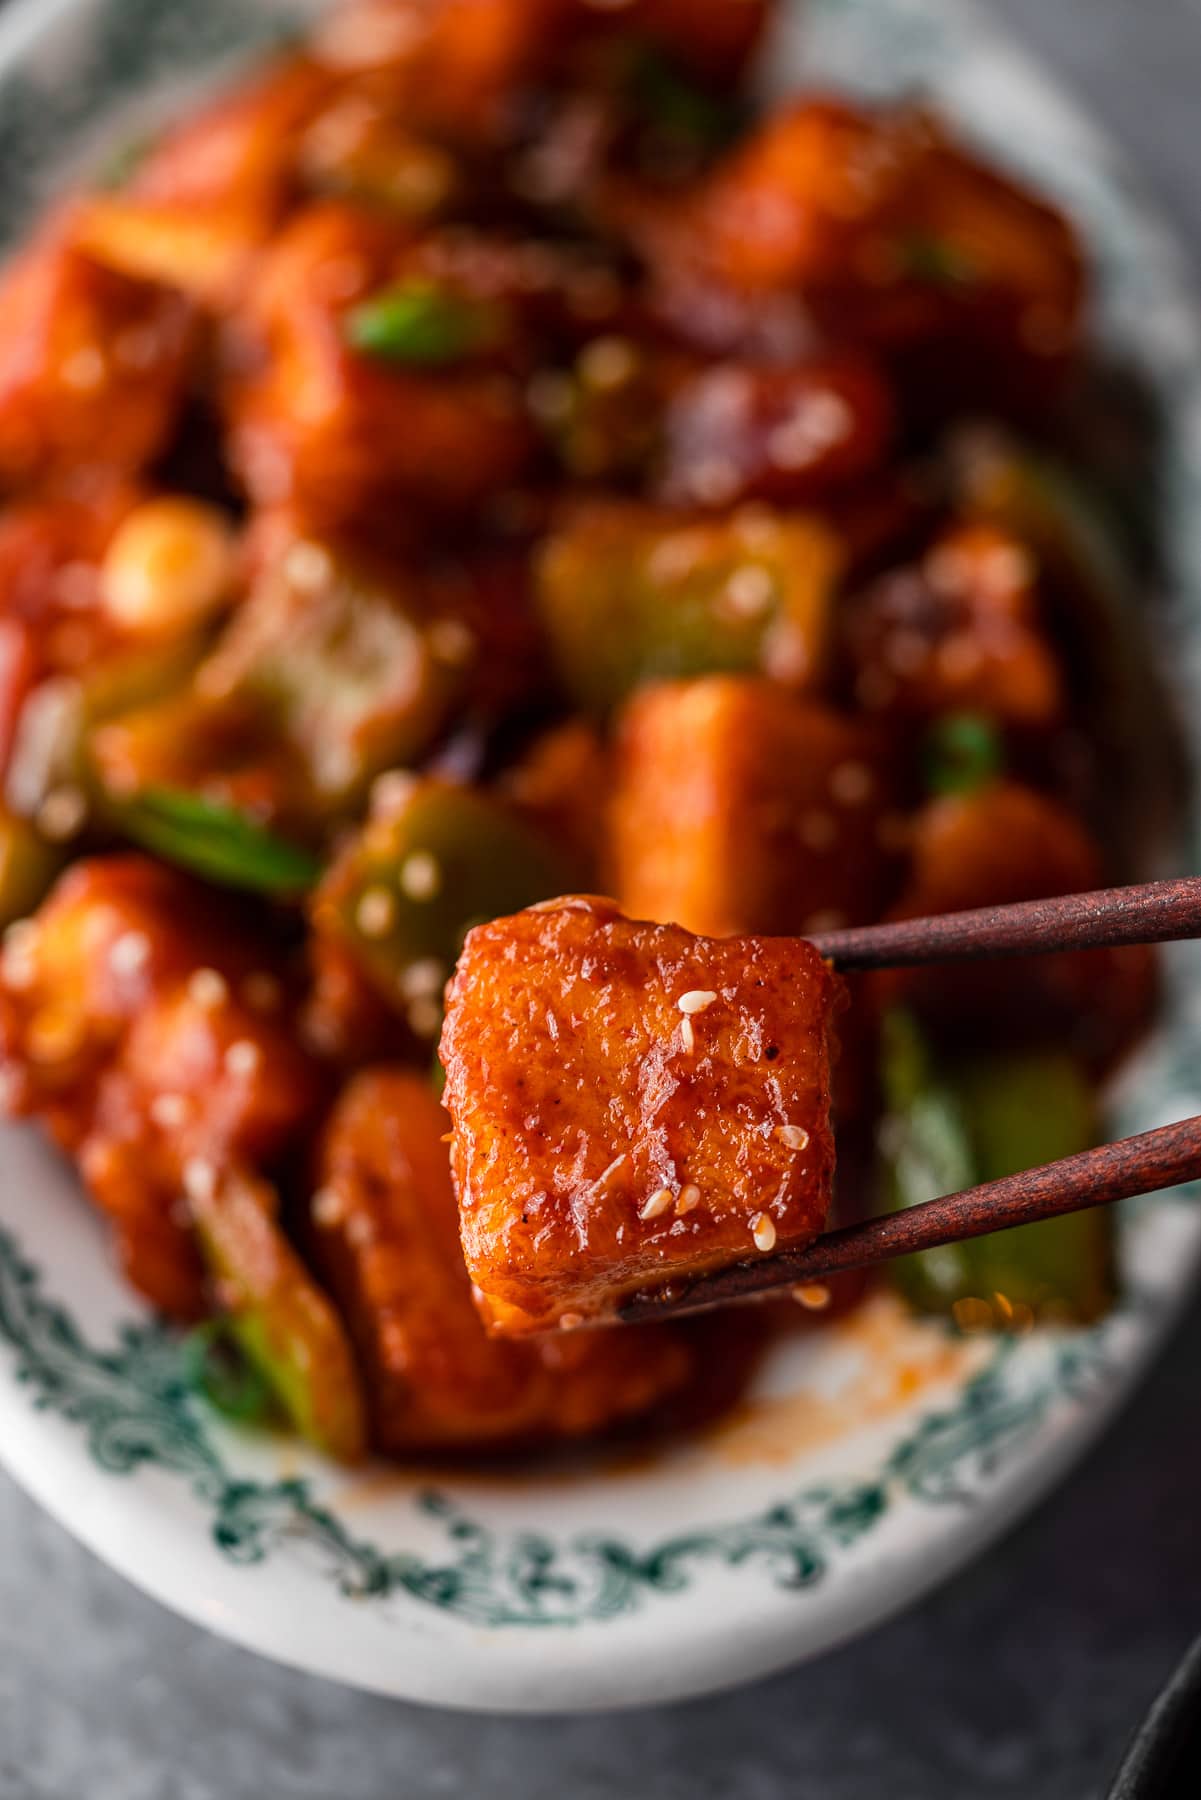 chopsticks holding up a piece of chili paneer